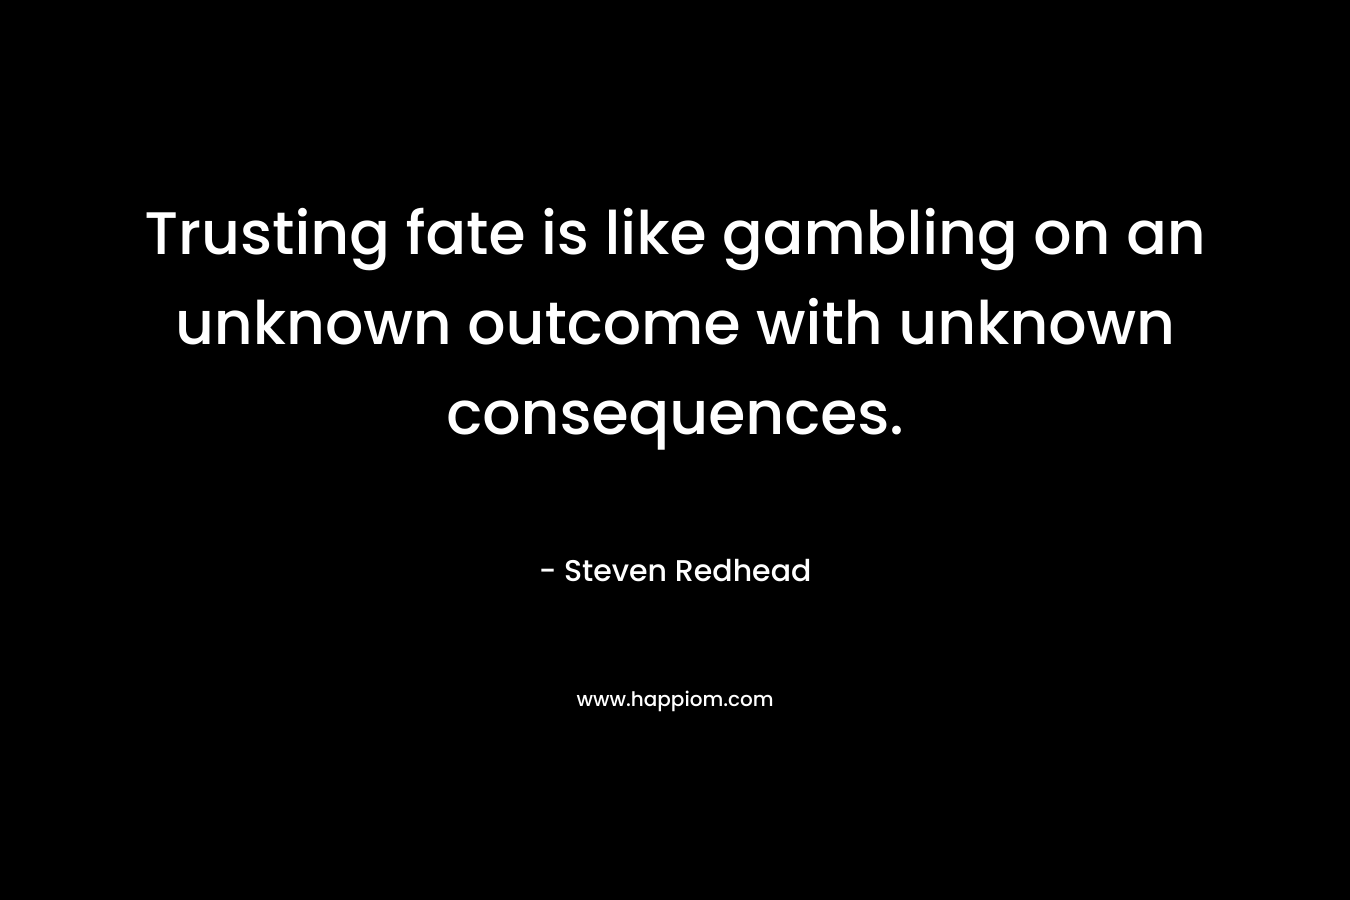 Trusting fate is like gambling on an unknown outcome with unknown consequences.